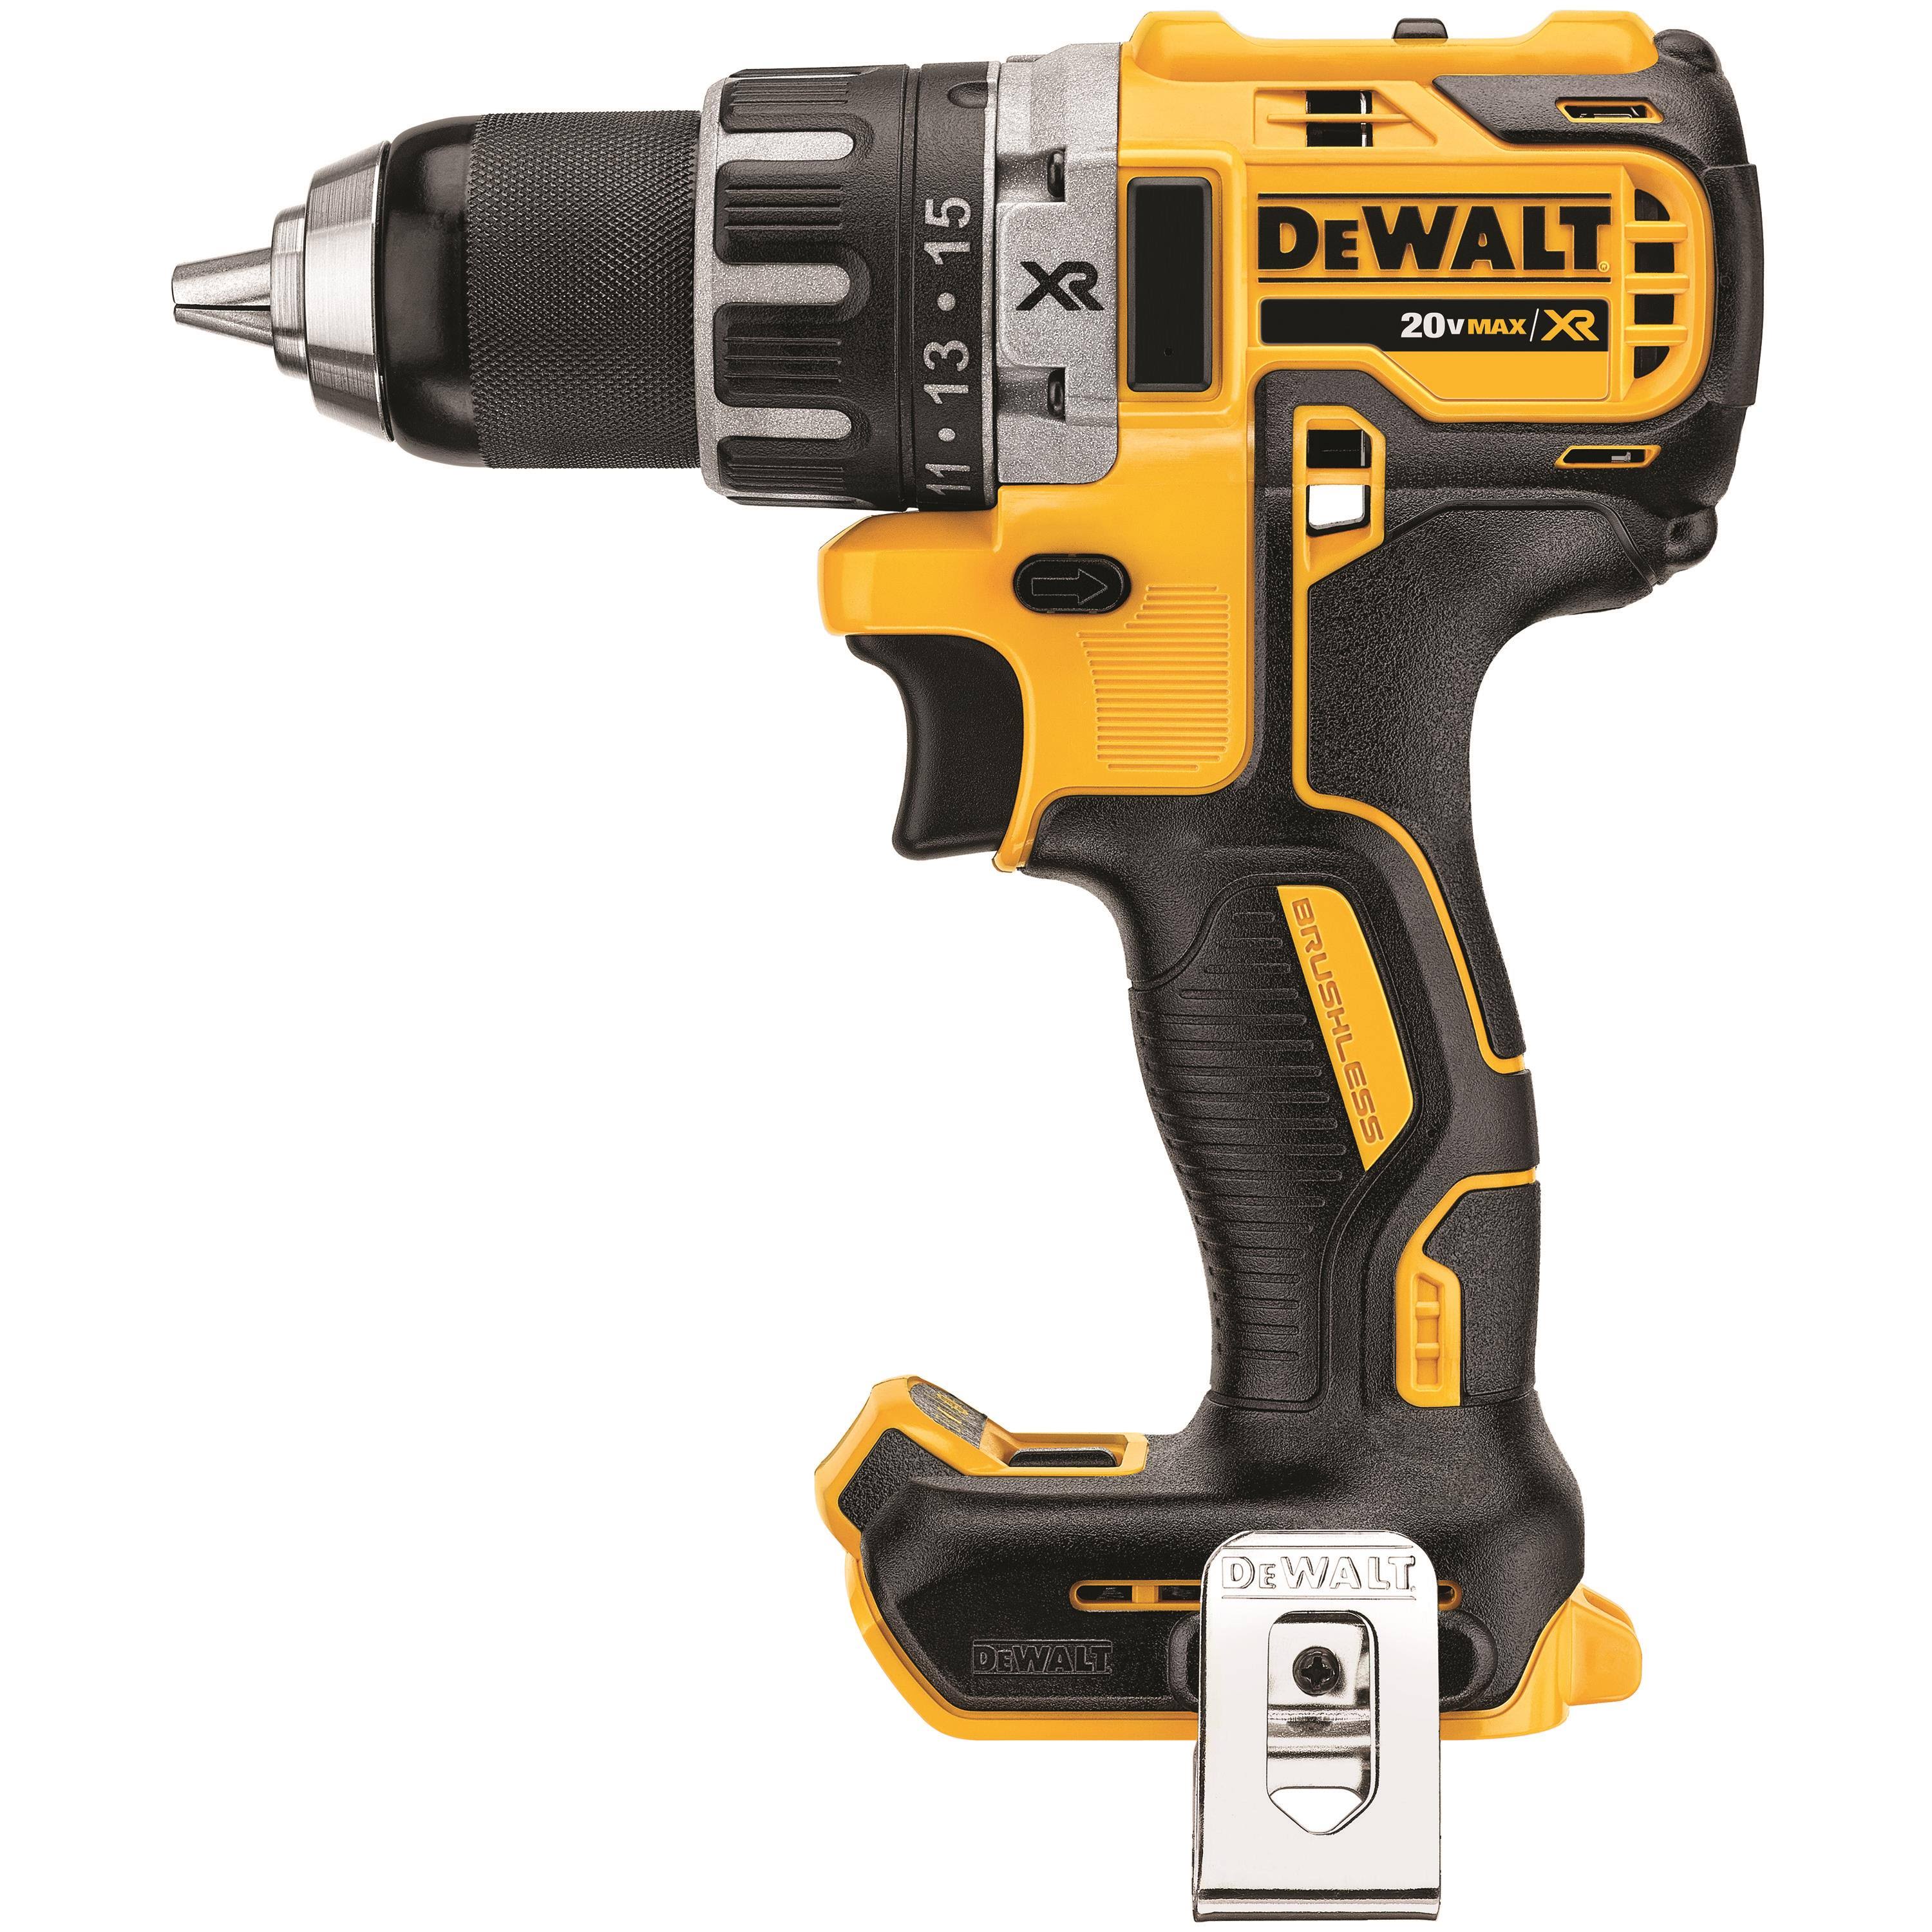 DEWALT DCK283D2 MAX XR Lithium Ion Brushless Compact Drill/Driver & Impact Driver Combo Kit, 20V